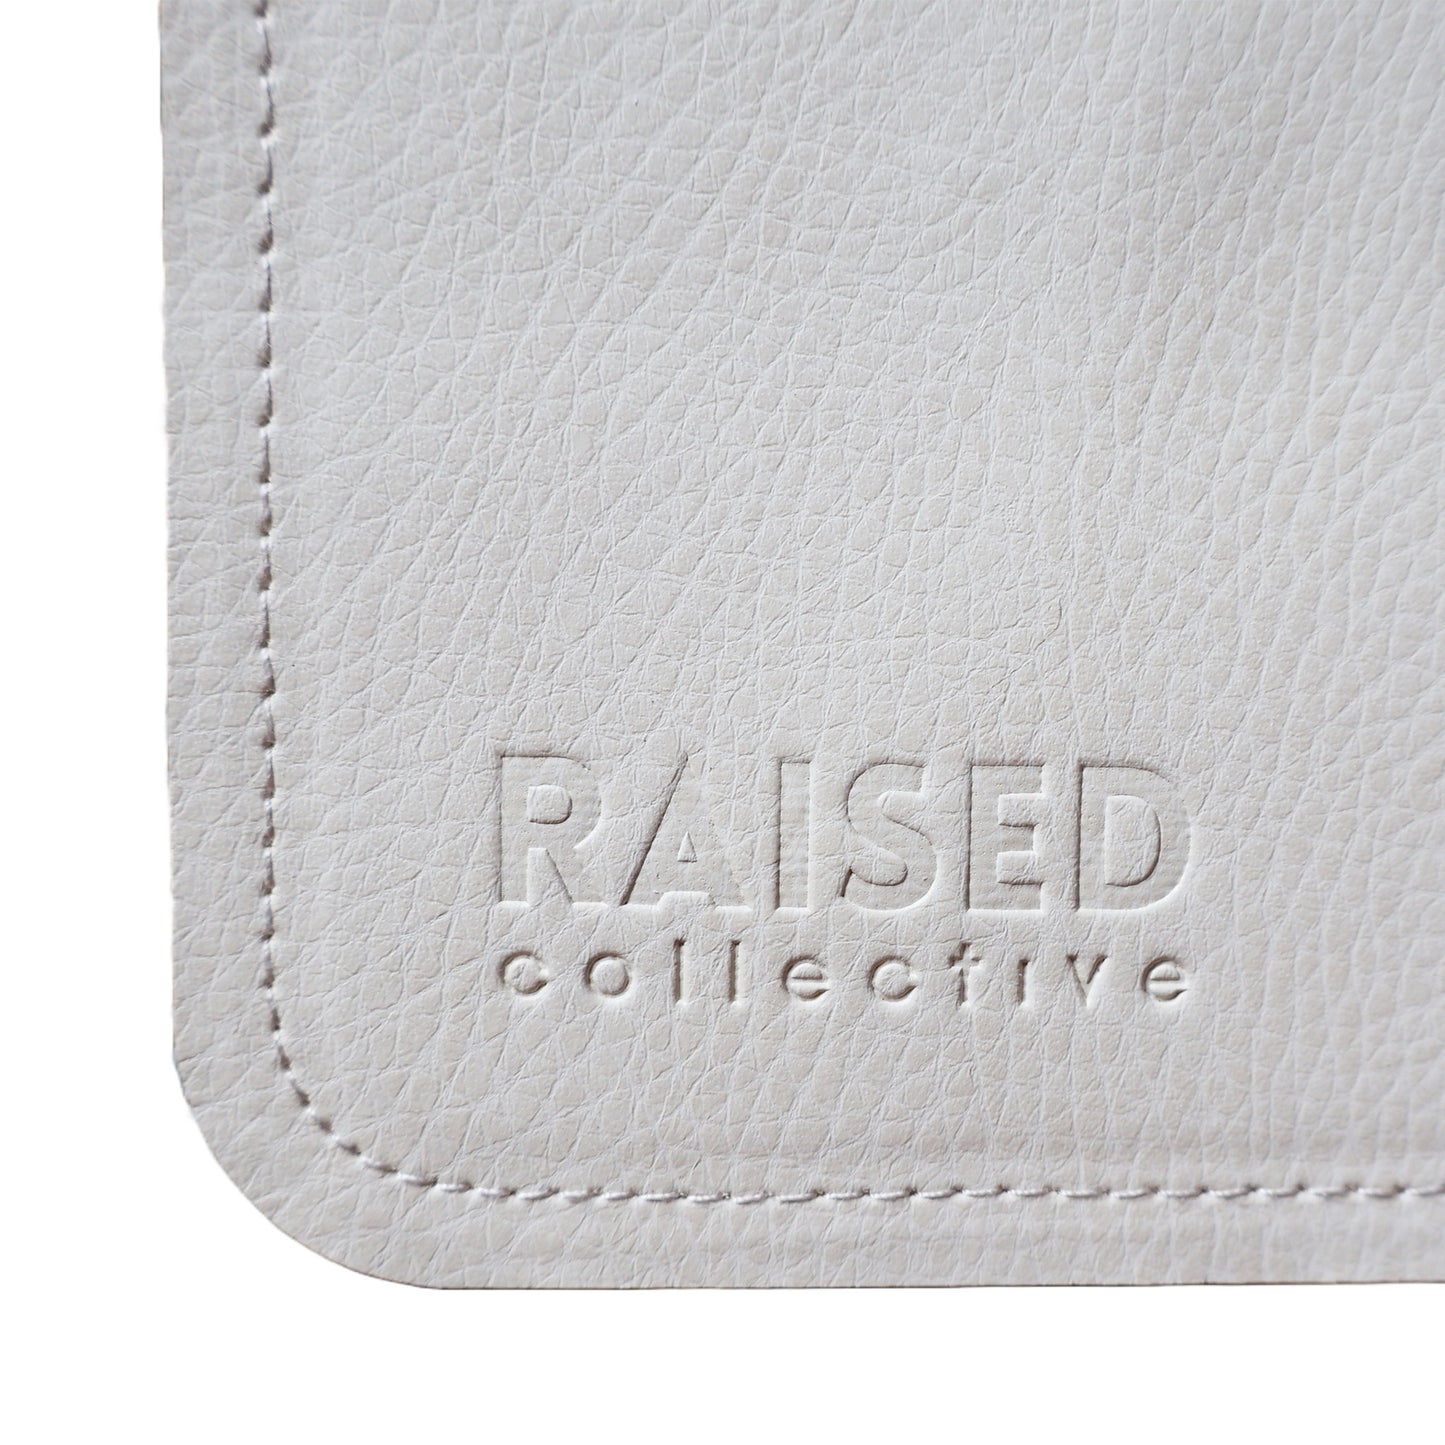 Foldable and portable baby change mat designed for your everyday outings with minimal and simple branding